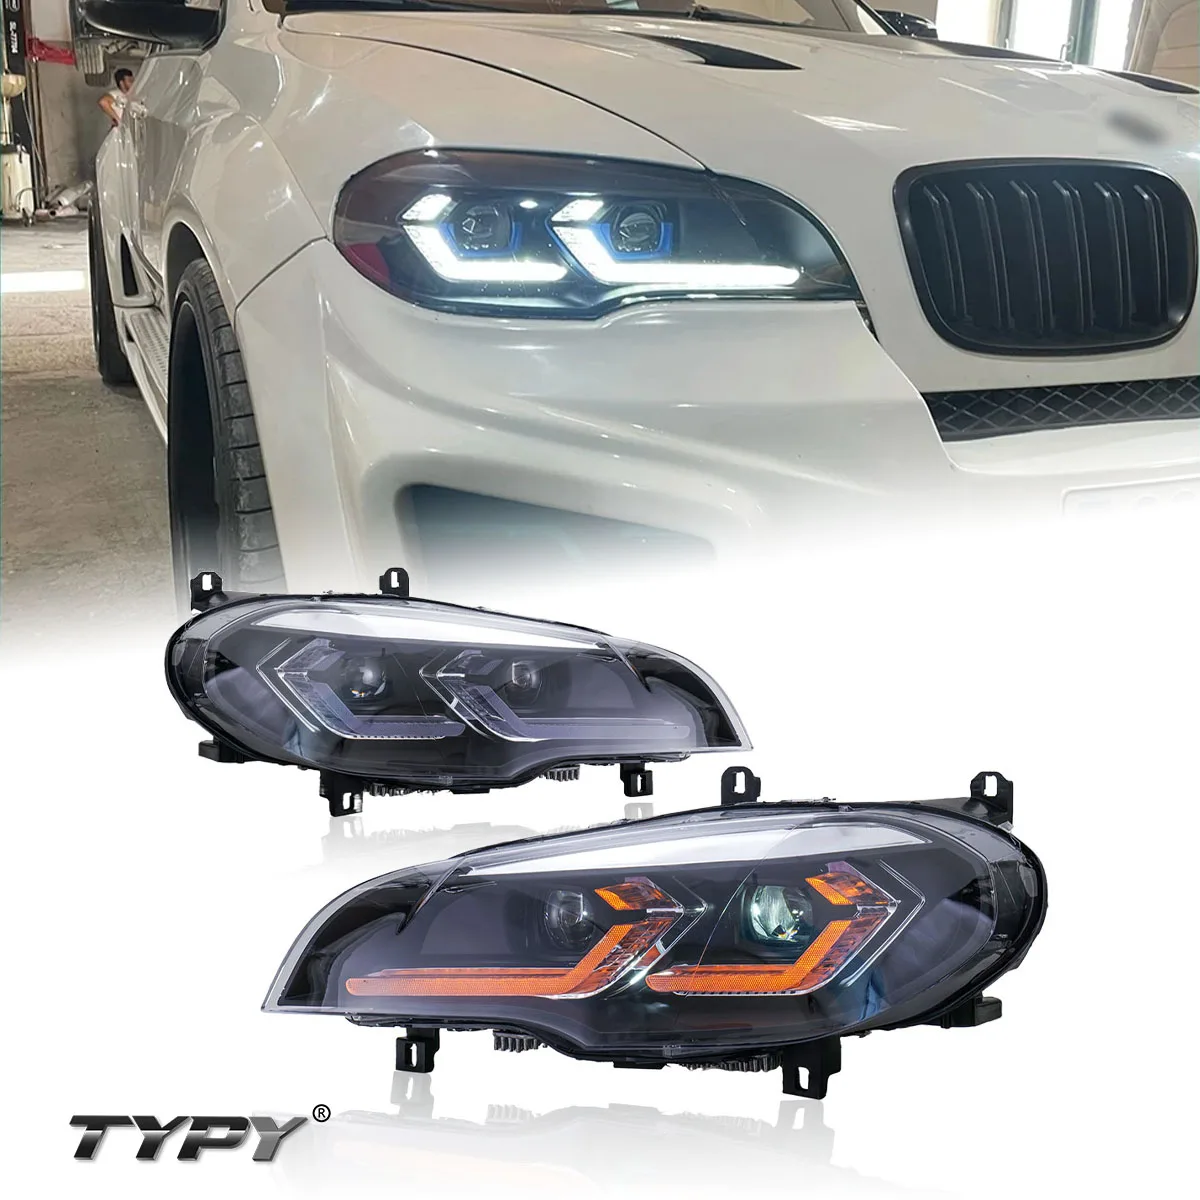 

TYPY Original Wholesale Price Auto Headlight Assembly For BMW X5 E70 2007-2013 Upgrade Modified LED Taillight